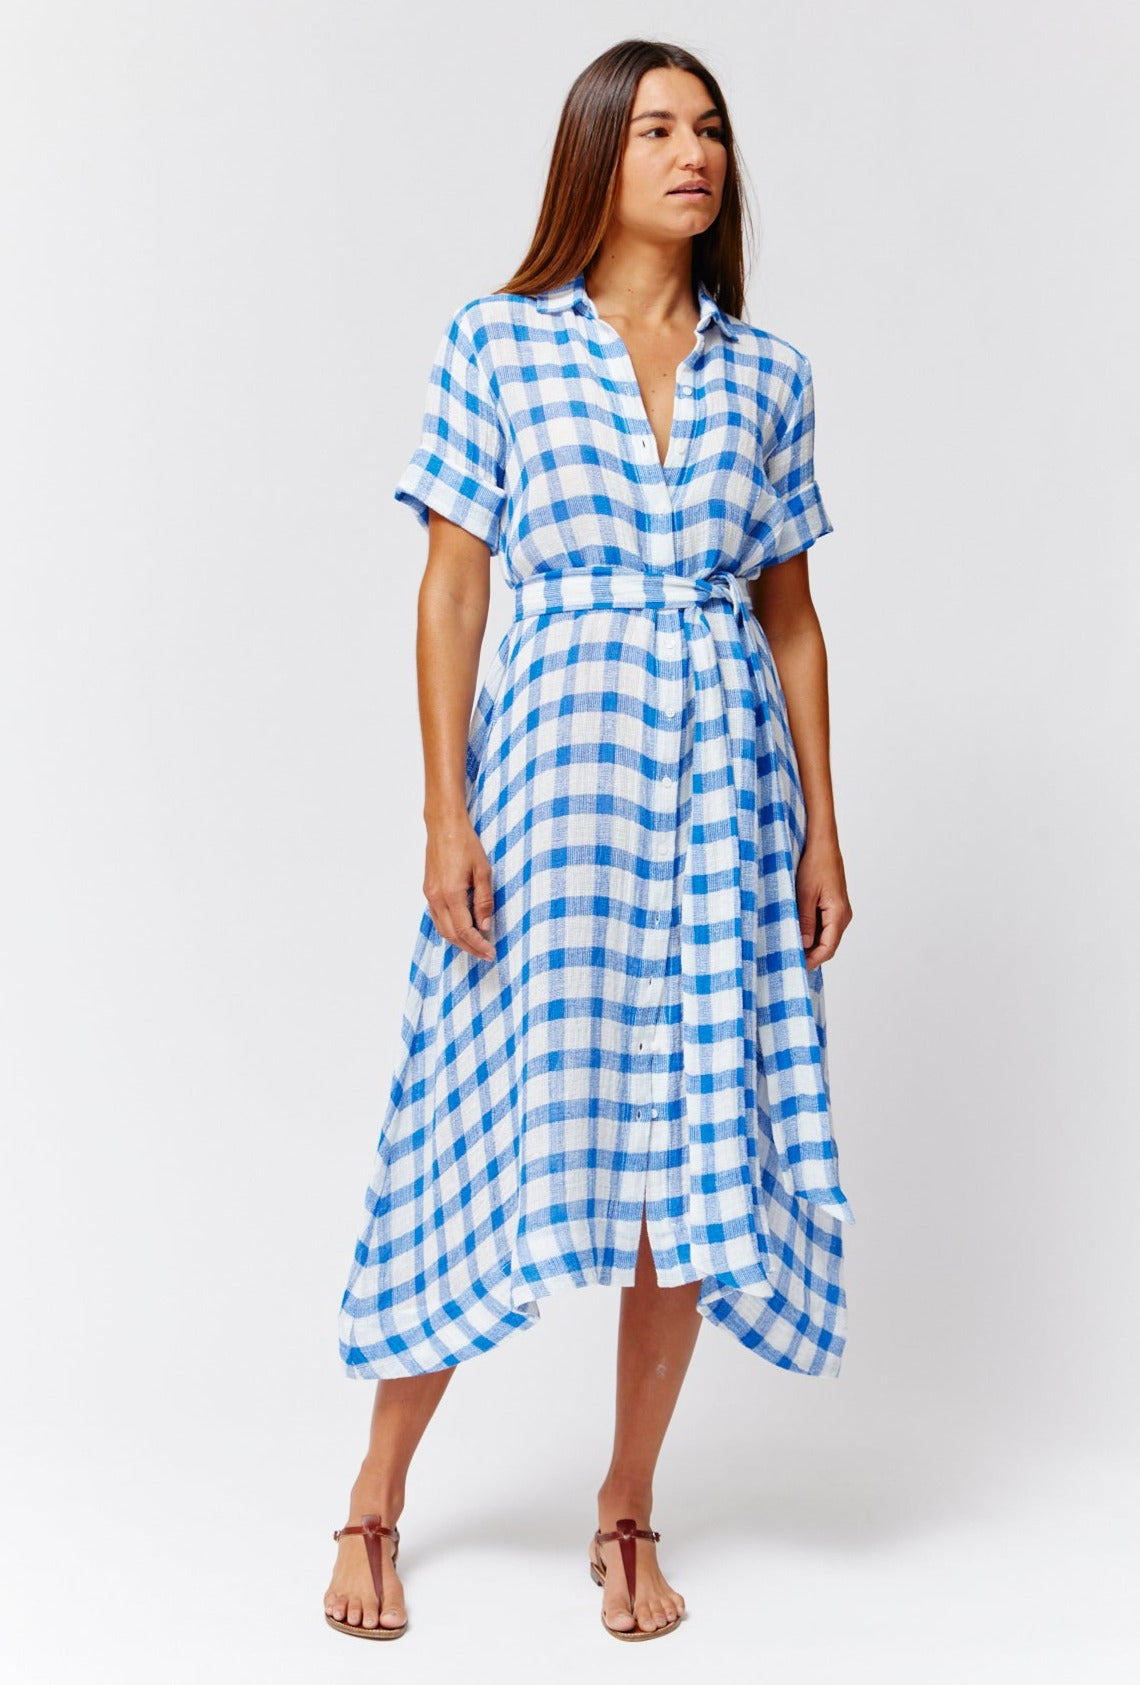 THE CLASSIC SHIRT DRESS in  FRENCH BLUE & WHITE GINGHAM CHIOS GAUZE